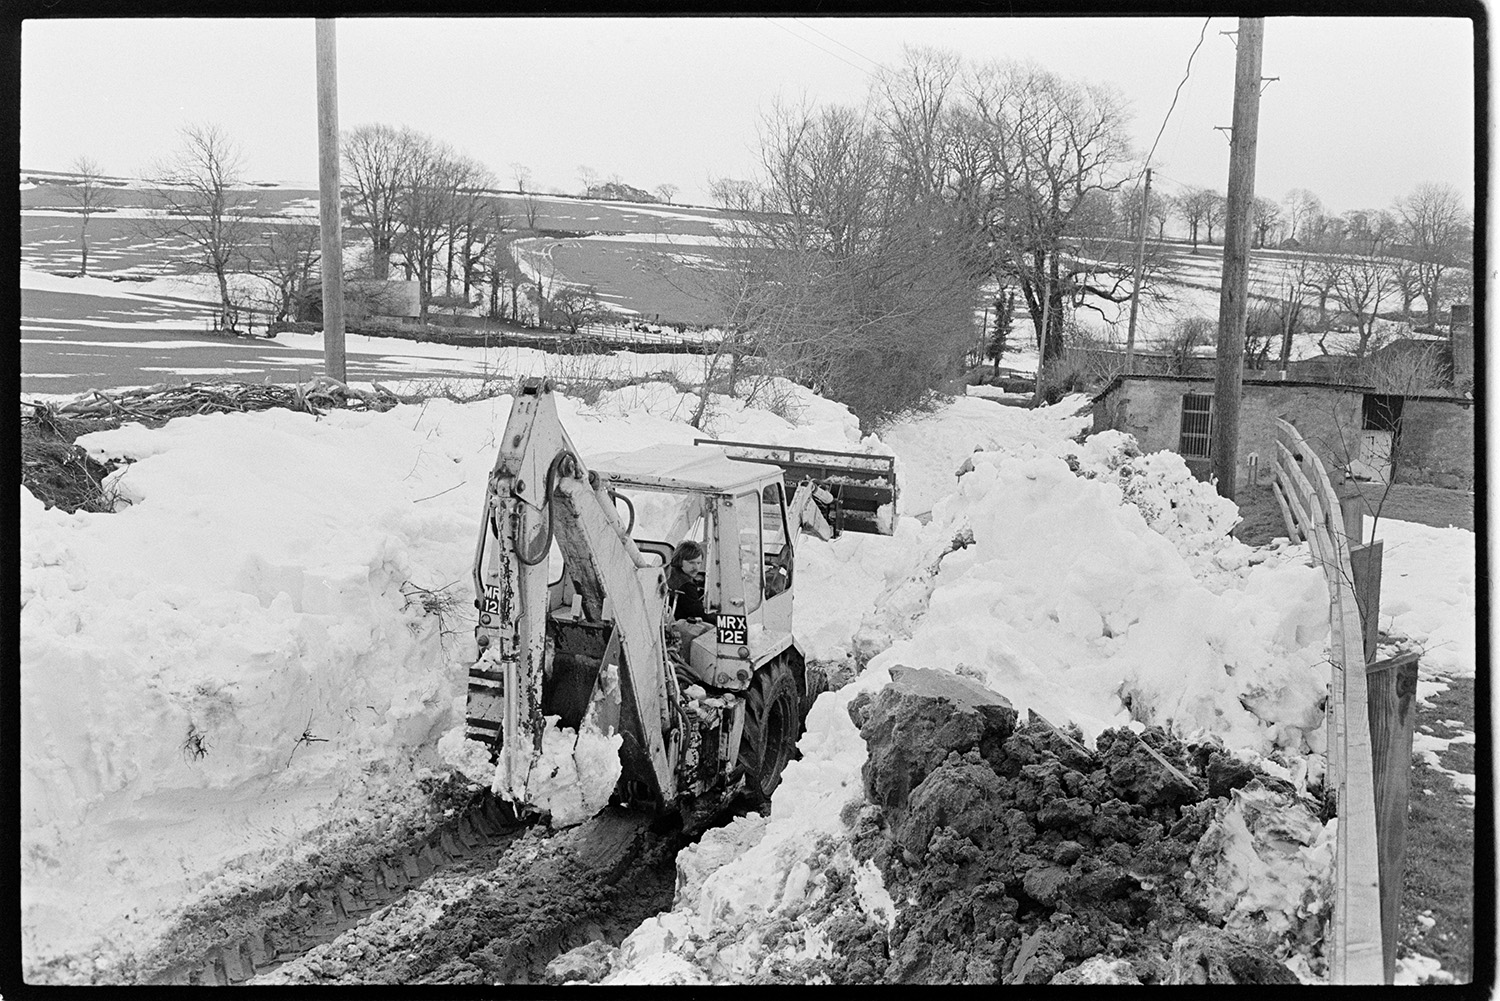 Snow, men clearing roads with digger, JCB. 
[A JCB digger clearing snowdrifts at Dolton. Fields and trees can be seen in the background.]